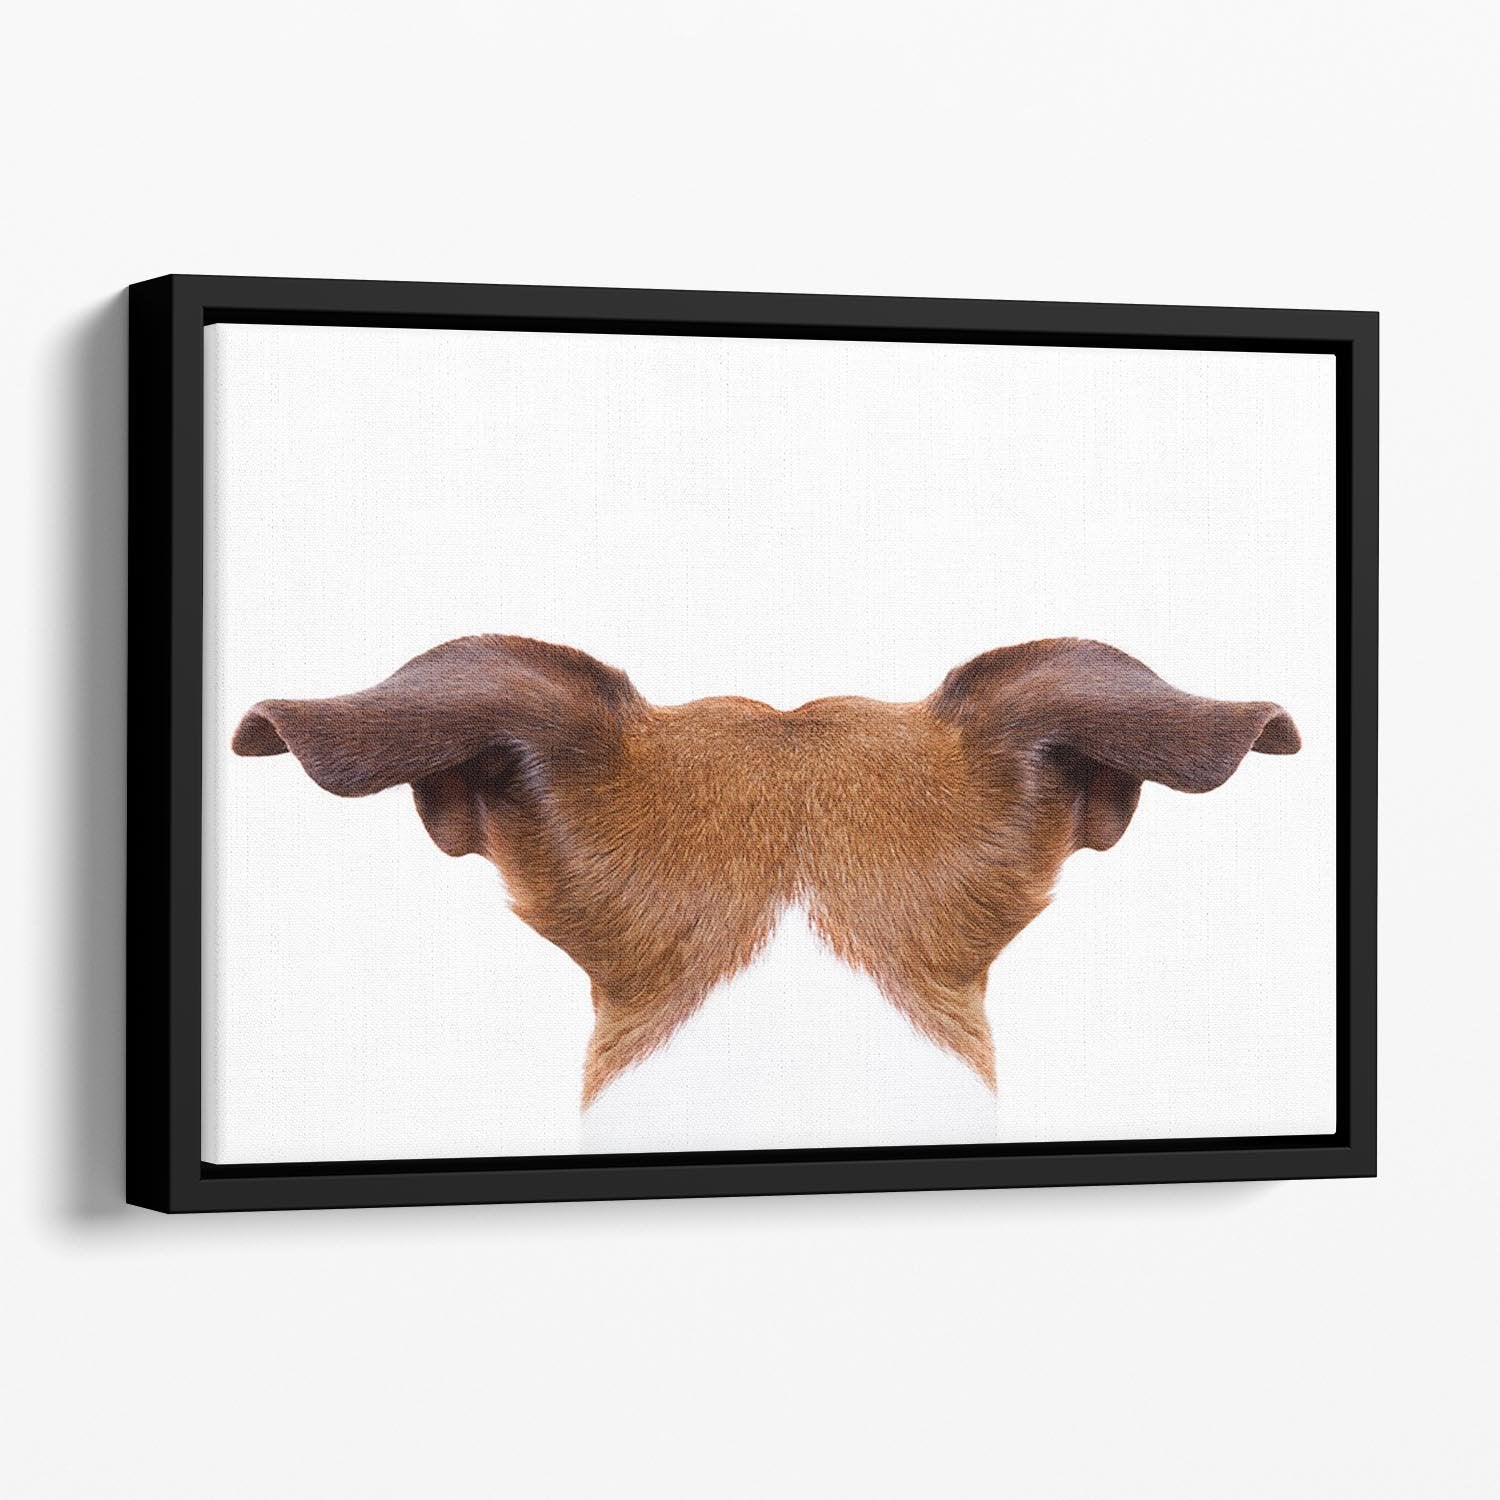 Jack russell dog looking and staring Floating Framed Canvas - Canvas Art Rocks - 1